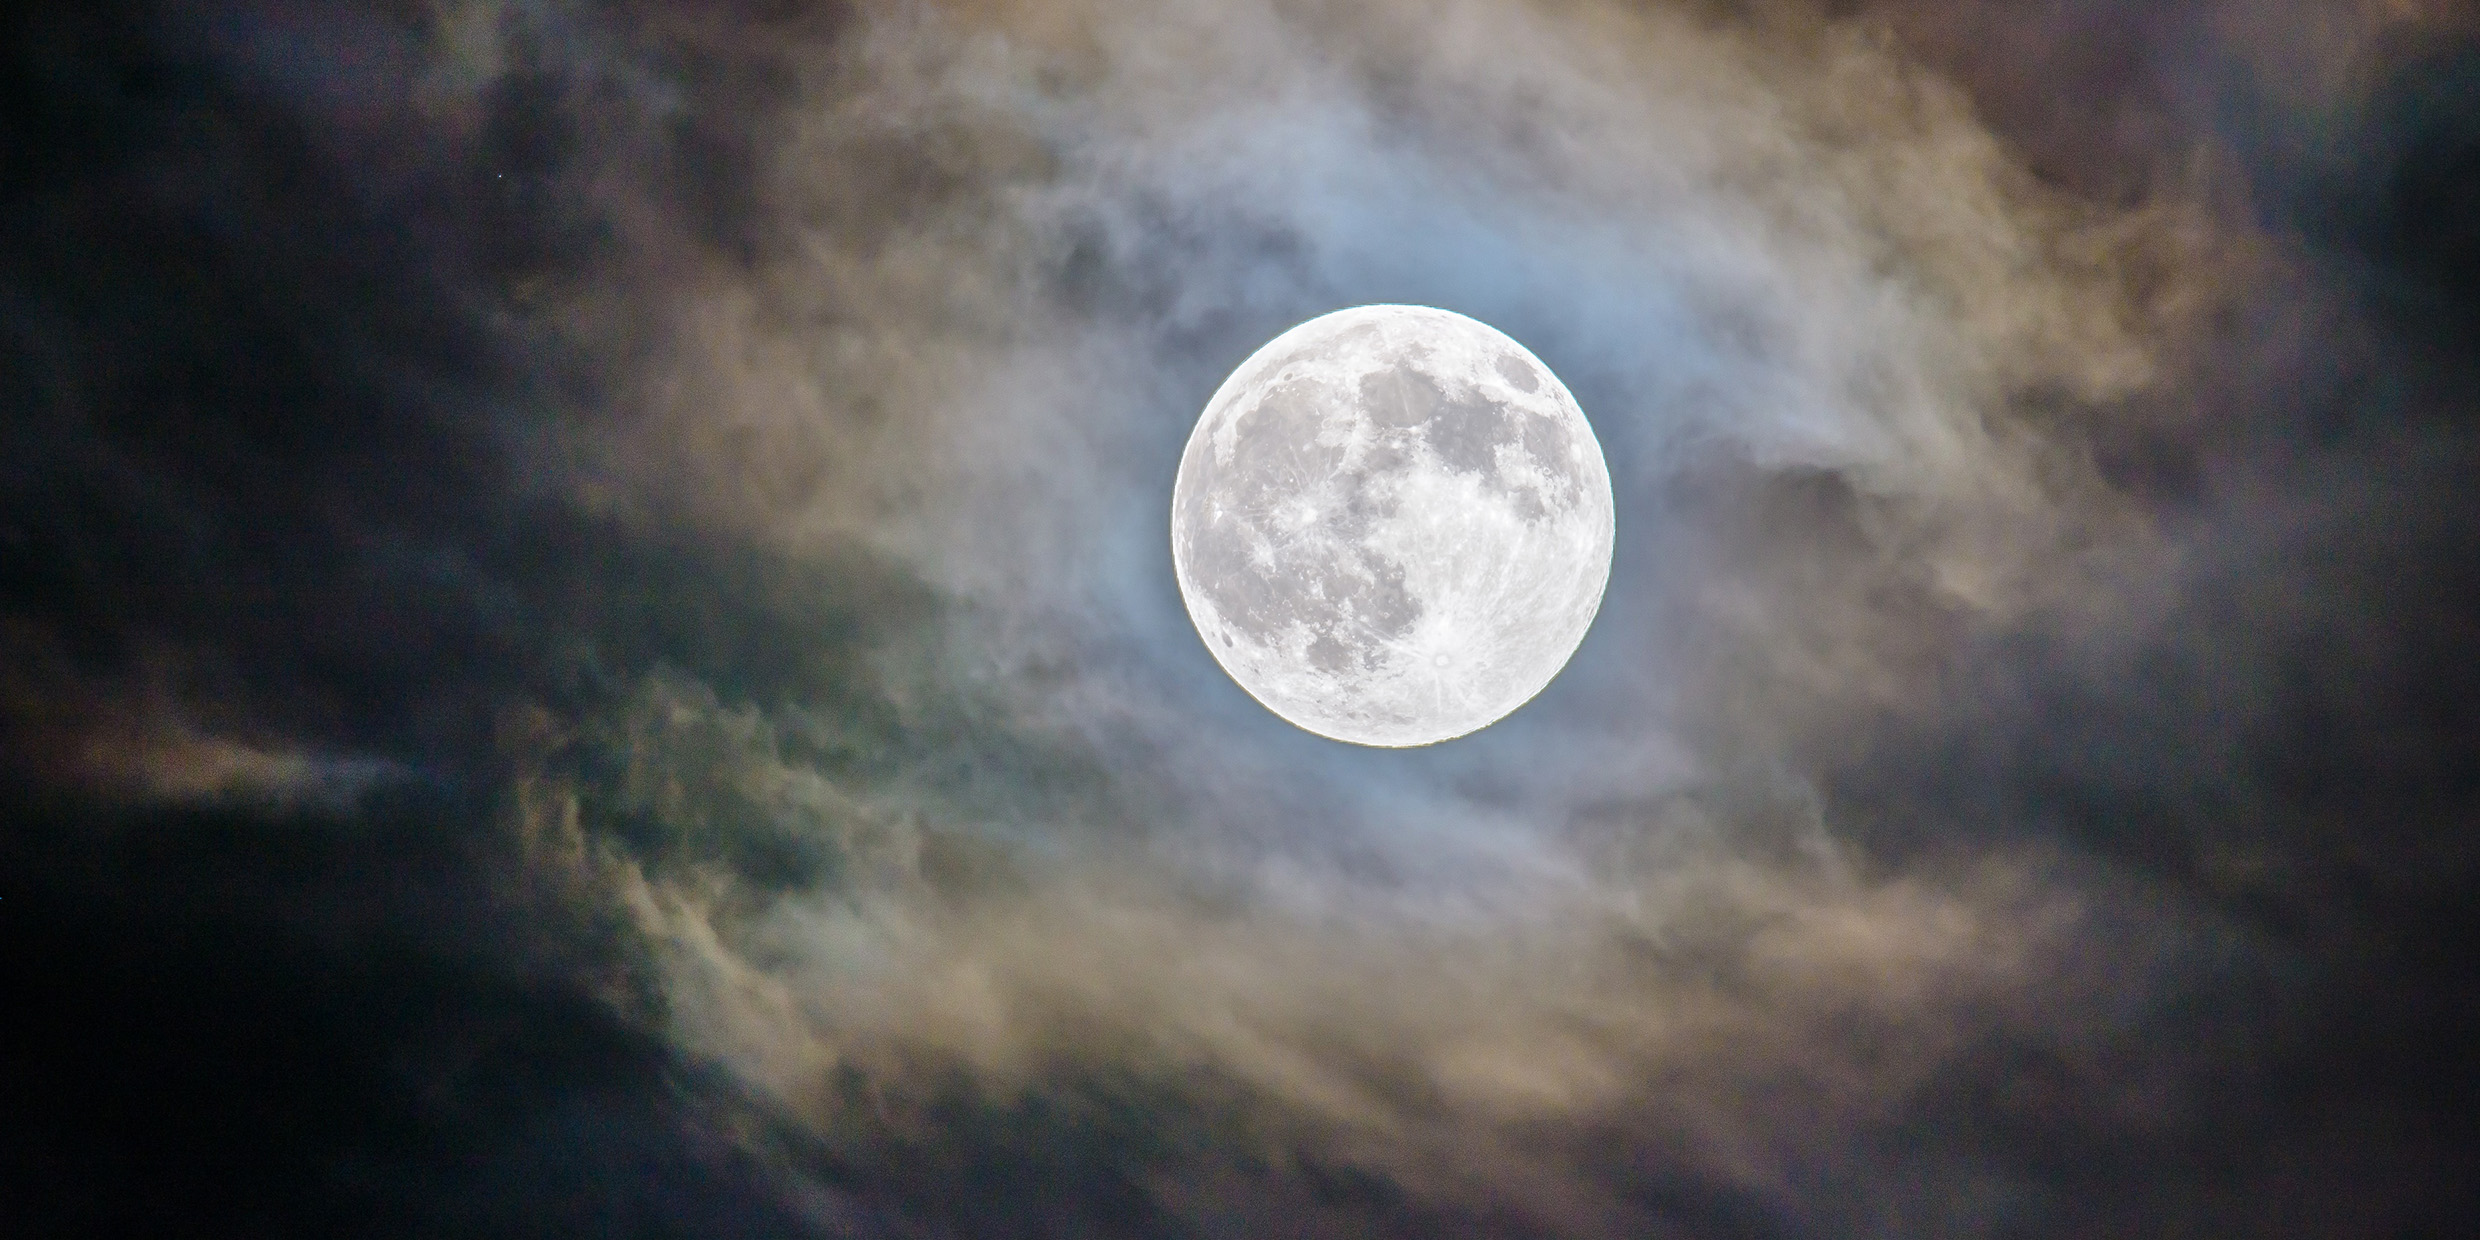 Image of a full moon in a cloudy sky